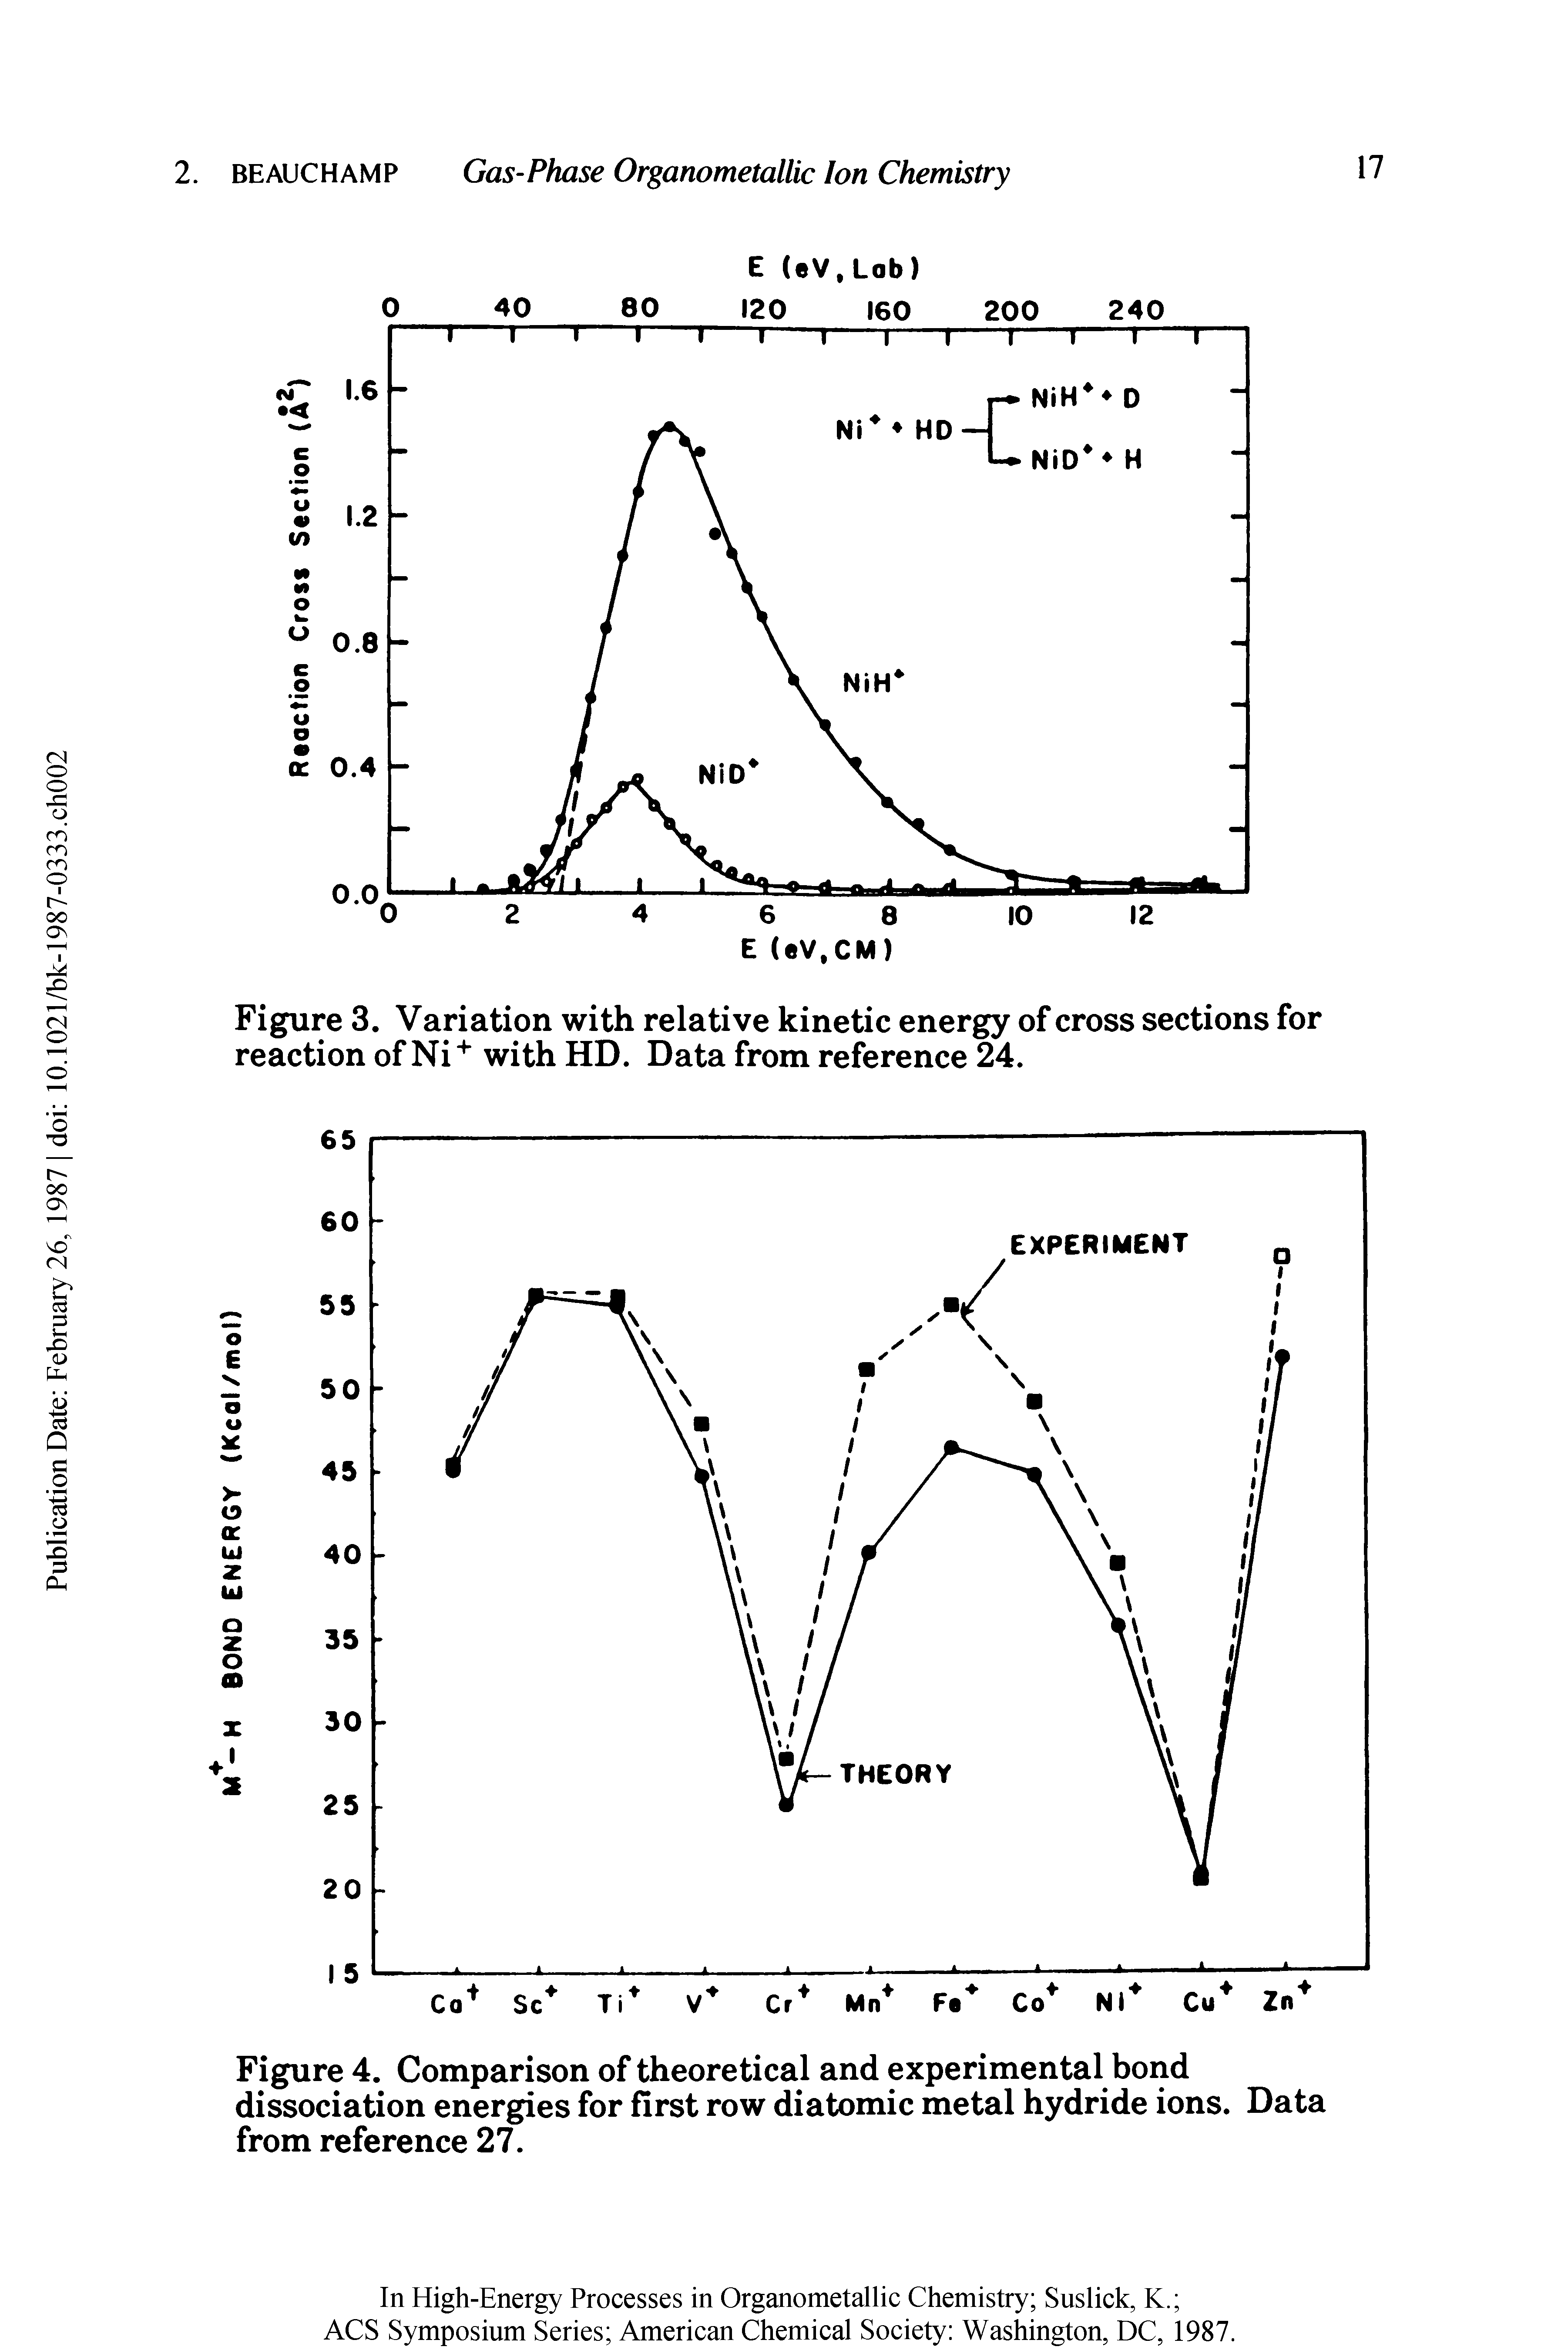 Figure 4. Comparison of theoretical and experimental bond dissociation energies for first row diatomic metal hydride ions. Data from reference 27.